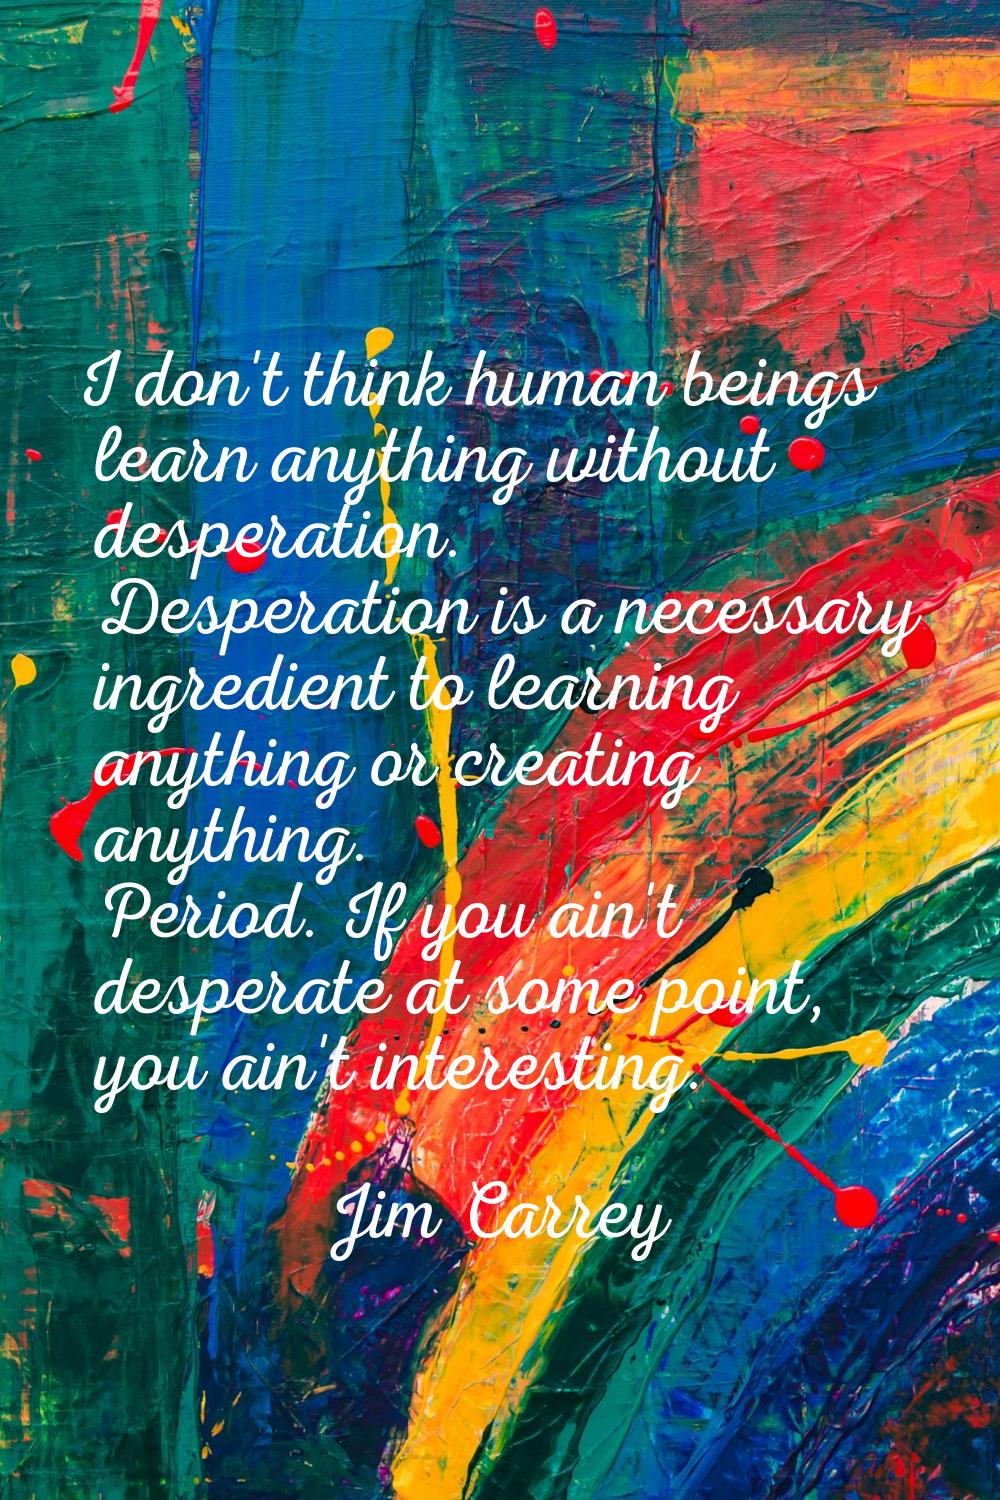 I don't think human beings learn anything without desperation. Desperation is a necessary ingredien